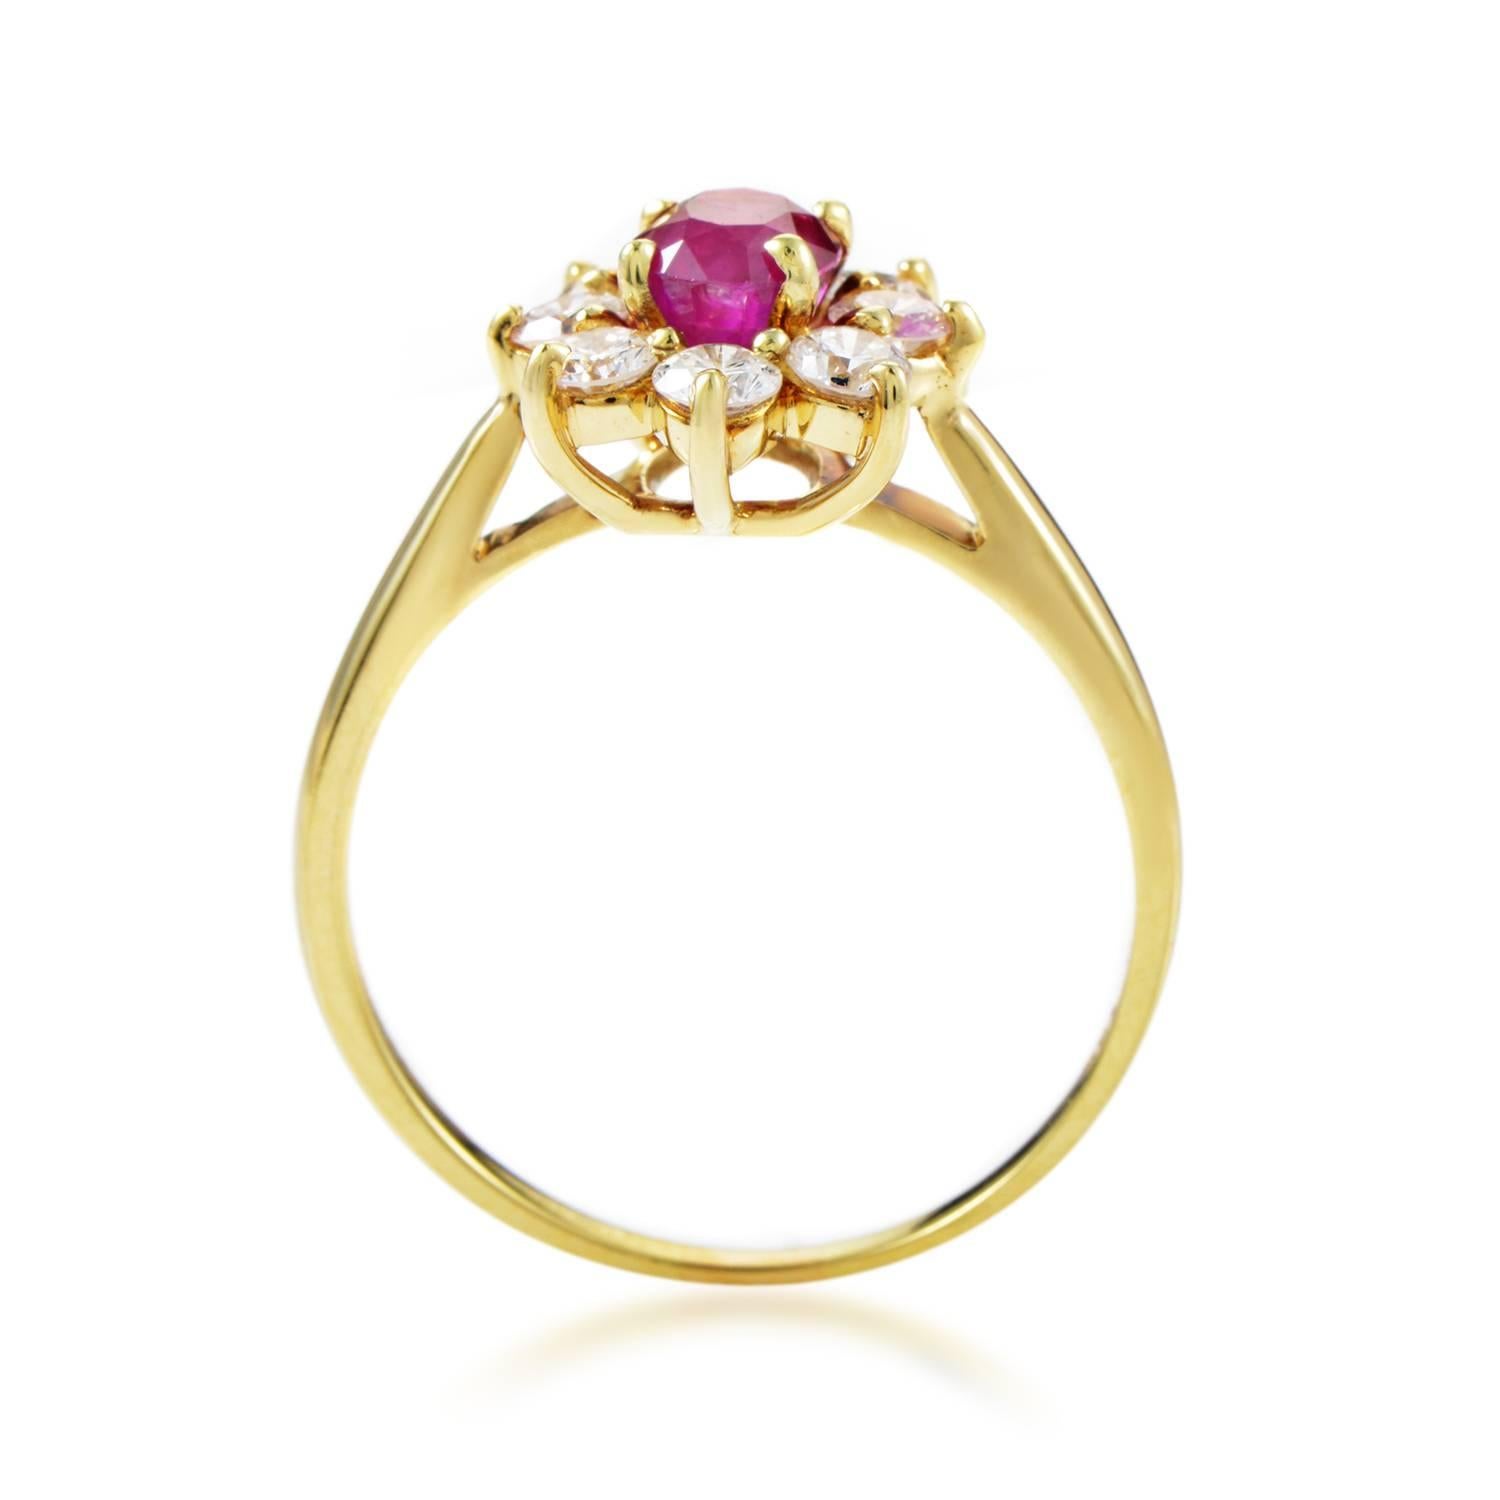 A glamorous depiction of a flower where lustrous diamonds totaling 0.80ct surround a majestic central ruby weighing 1.00 carat as brilliant sparkling petals upon a gracefully slim 18K yellow gold body, this delightful ring is a fascinating item from